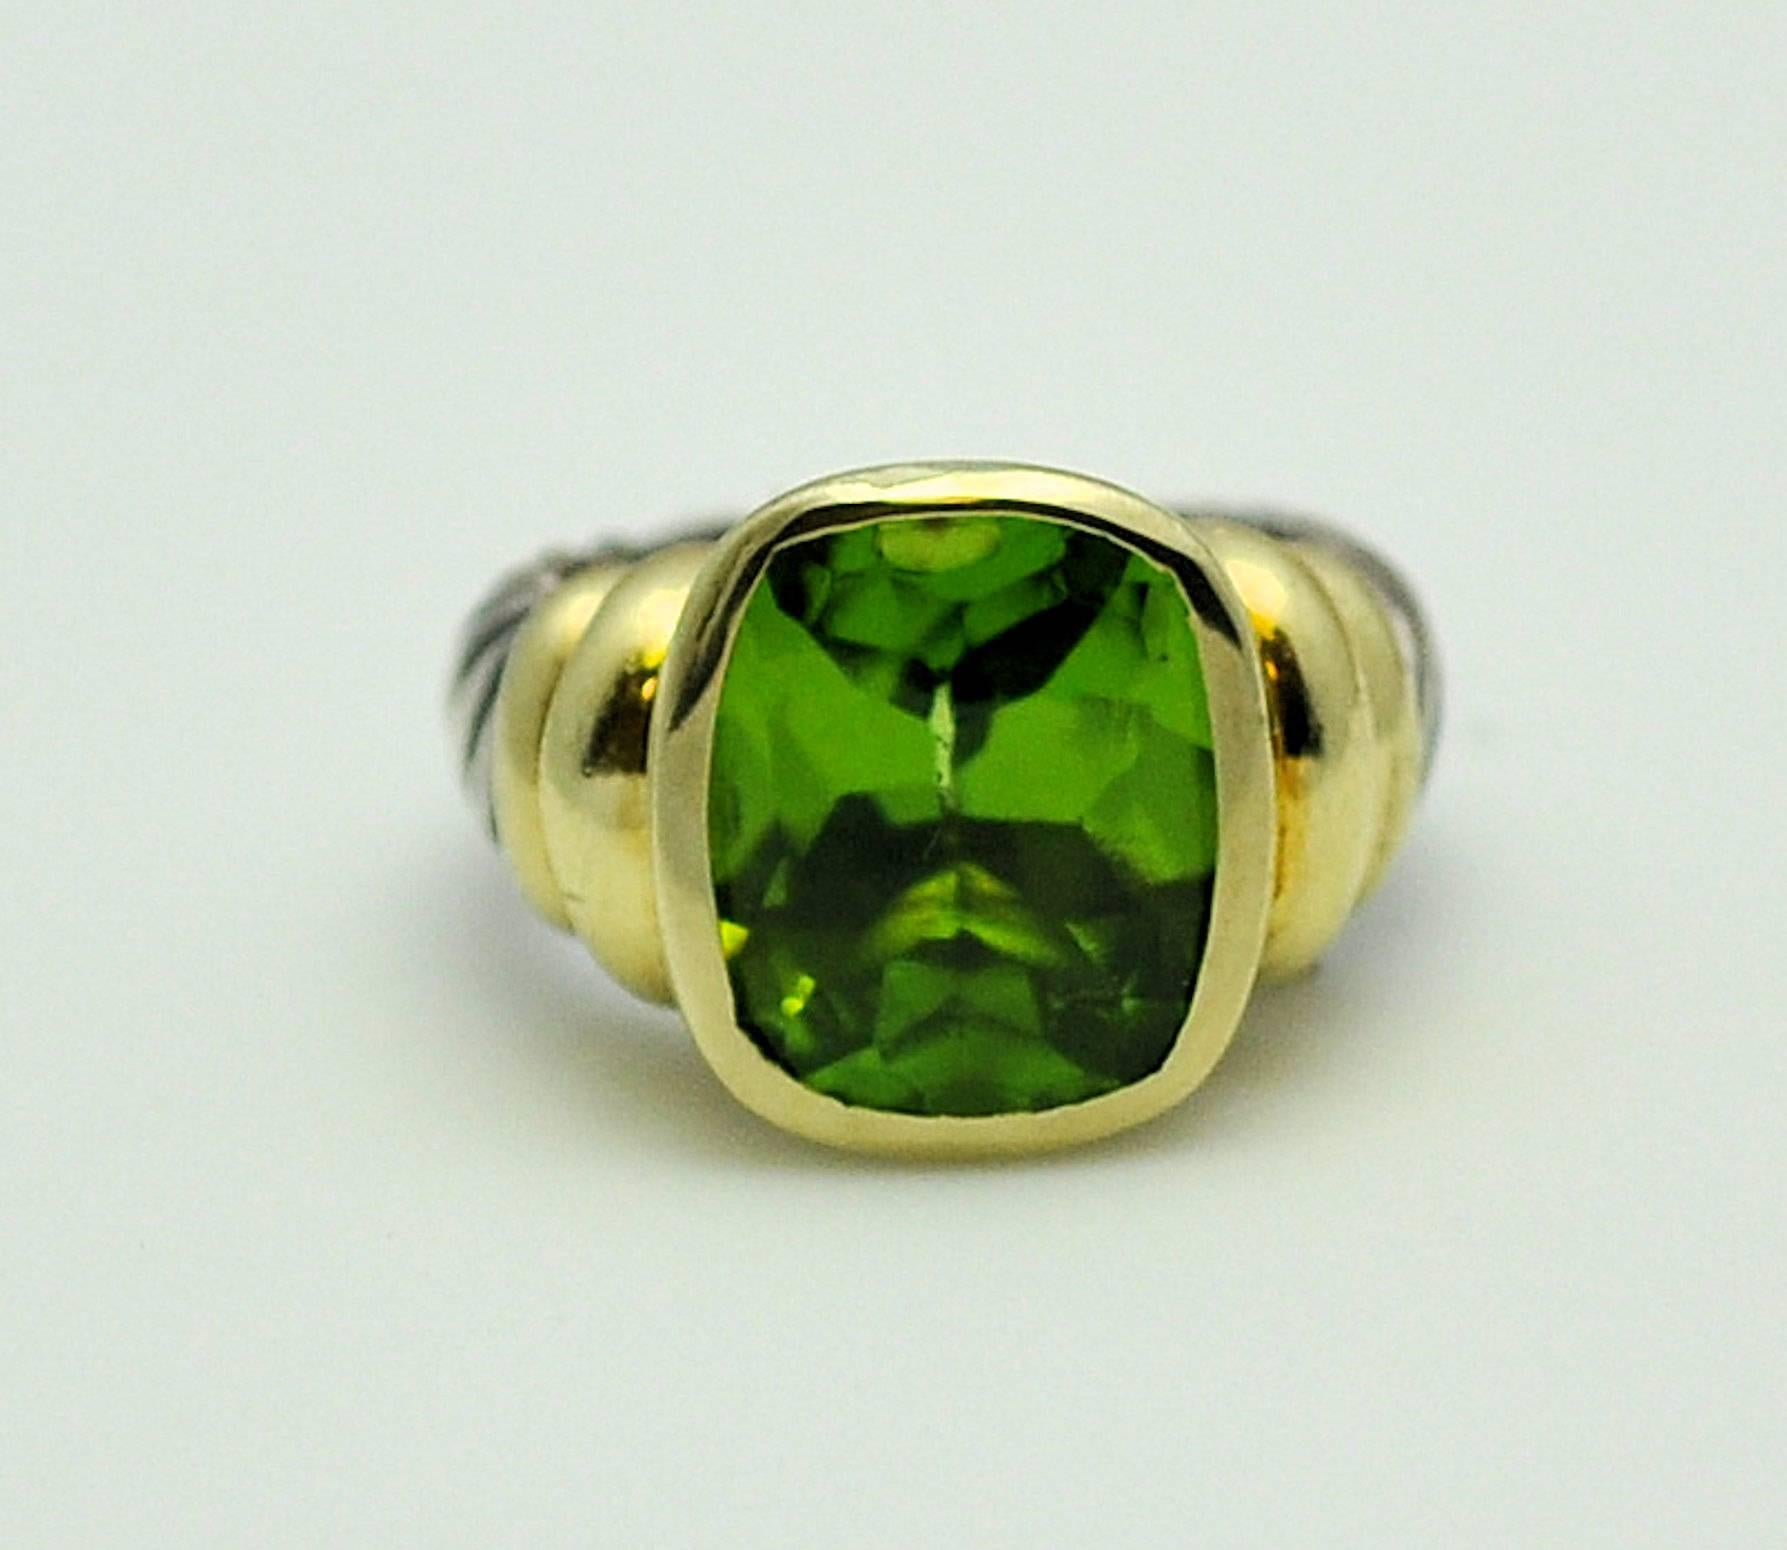 14K yellow gold and sterling silver David Yurman Noblesse Peridot ring. The peridot is bezel set and measures 15 x 12 mm.  Buff-top, faceted pavilion. This model is retired and highly sought after, a wonderful large peridot weighing approximately